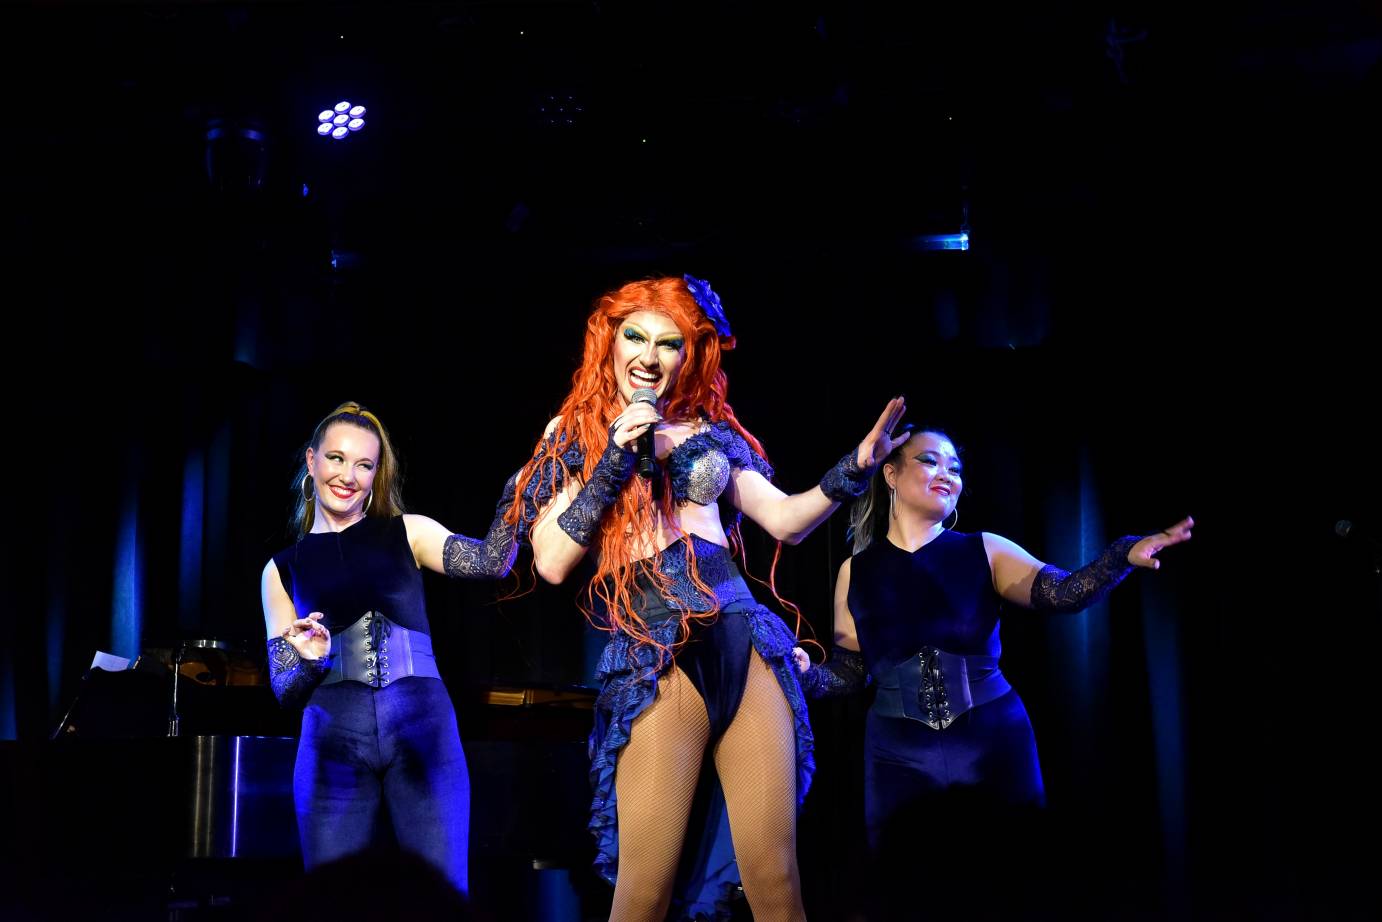 Drag queen in red wig and sparkly blue 'maritime-esque' costume with two women back up singers in blue, all gesturing with left hands on left diagonal, elbows bent